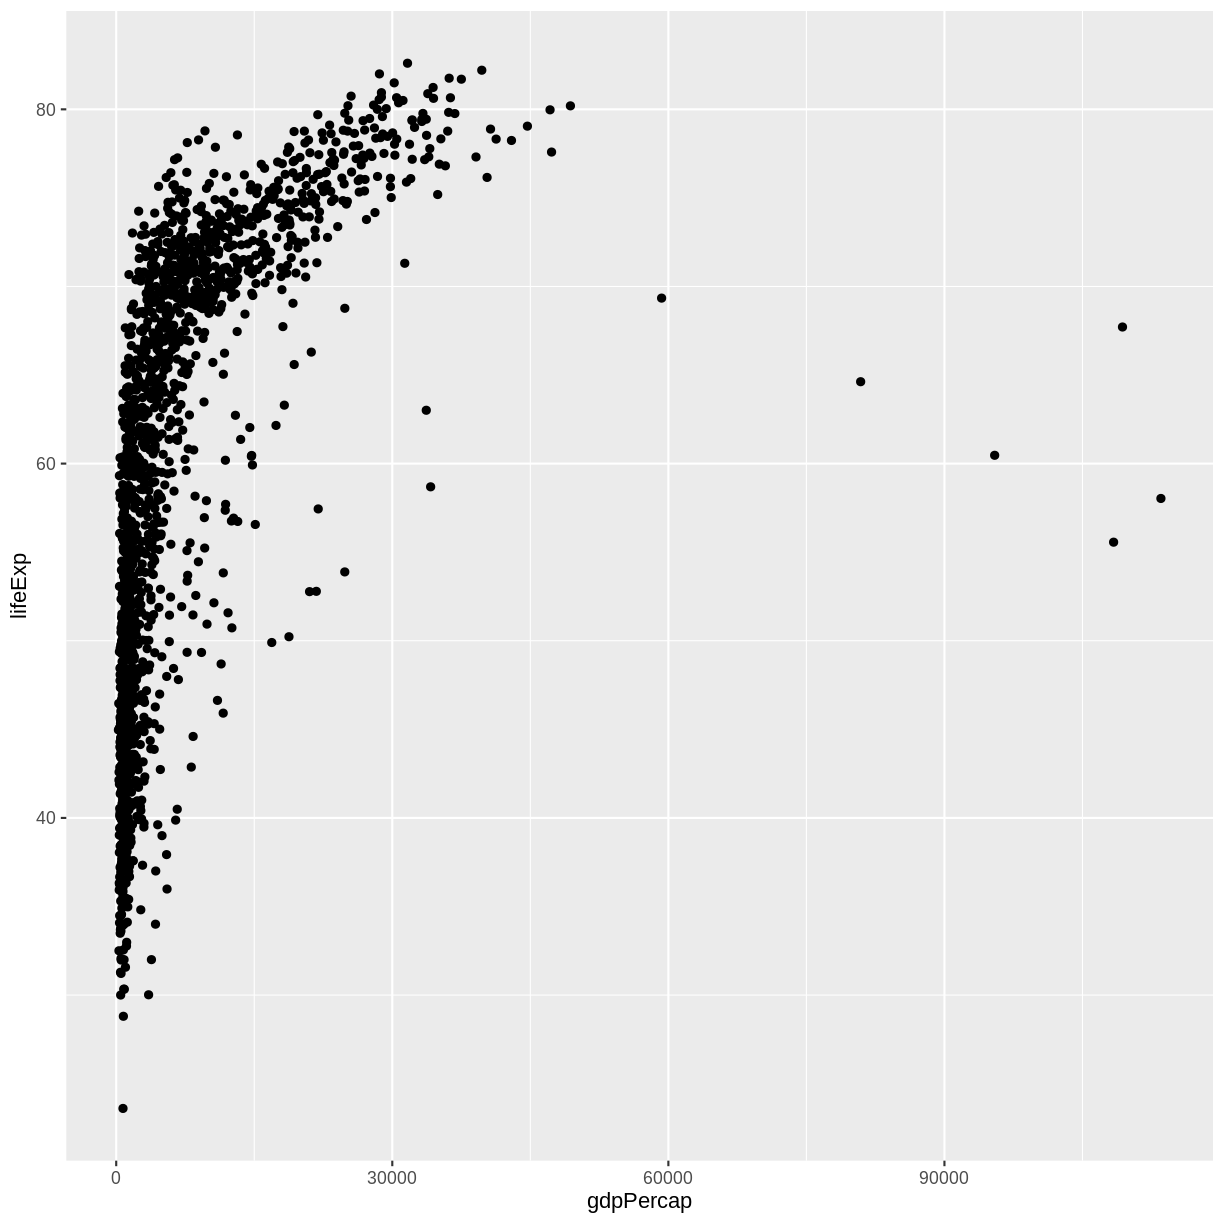 Scatter plot of life expectancy vs GDP per capita, showing a positive correlation between the two variables with data points added.